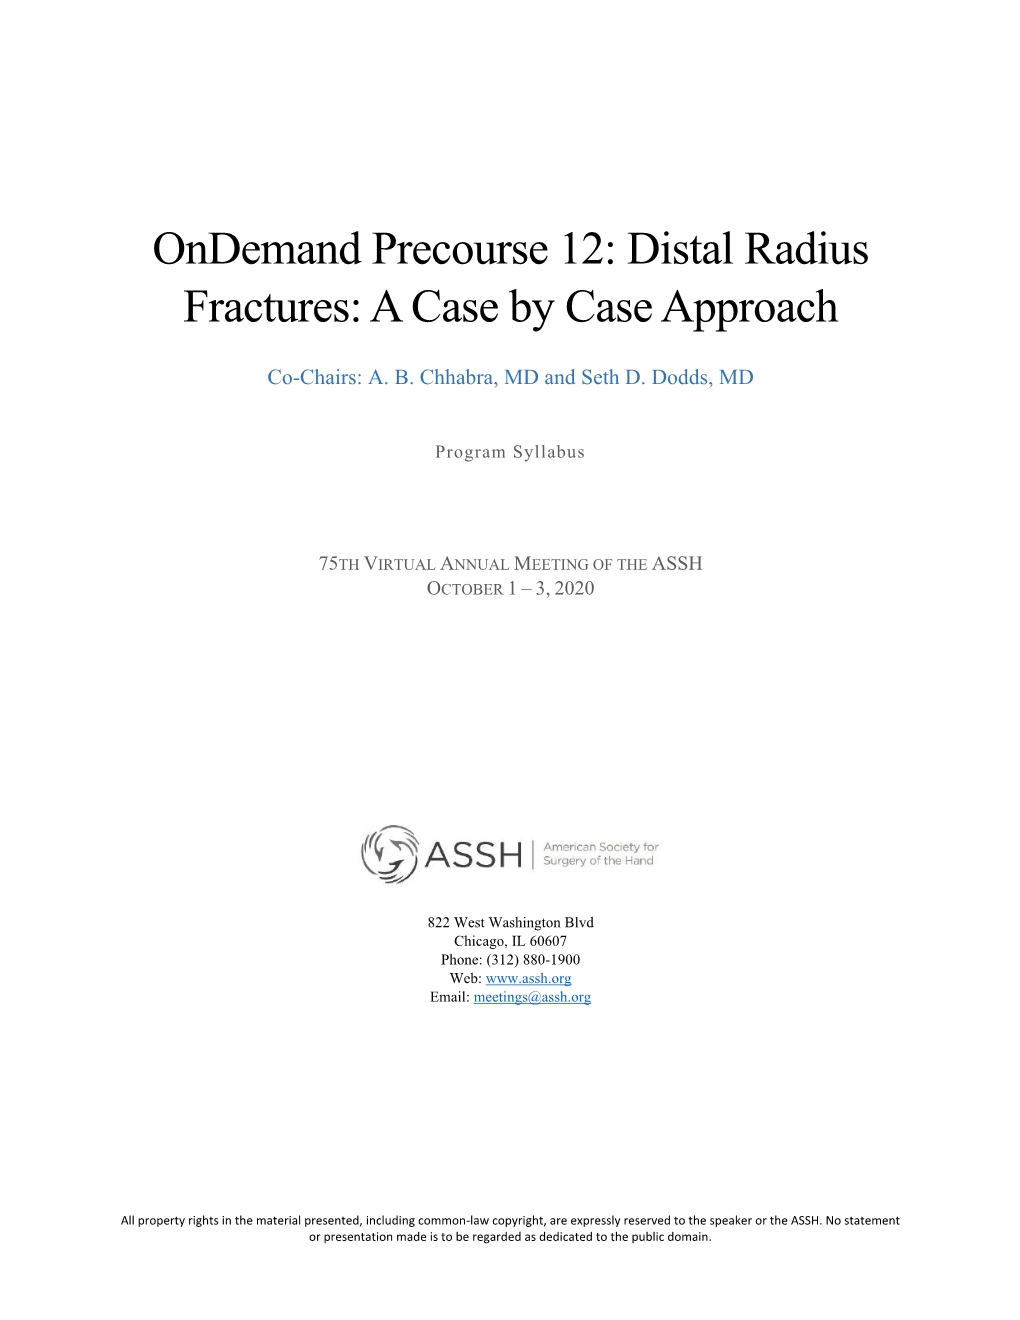 Distal Radius Fractures: a Case by Case Approach